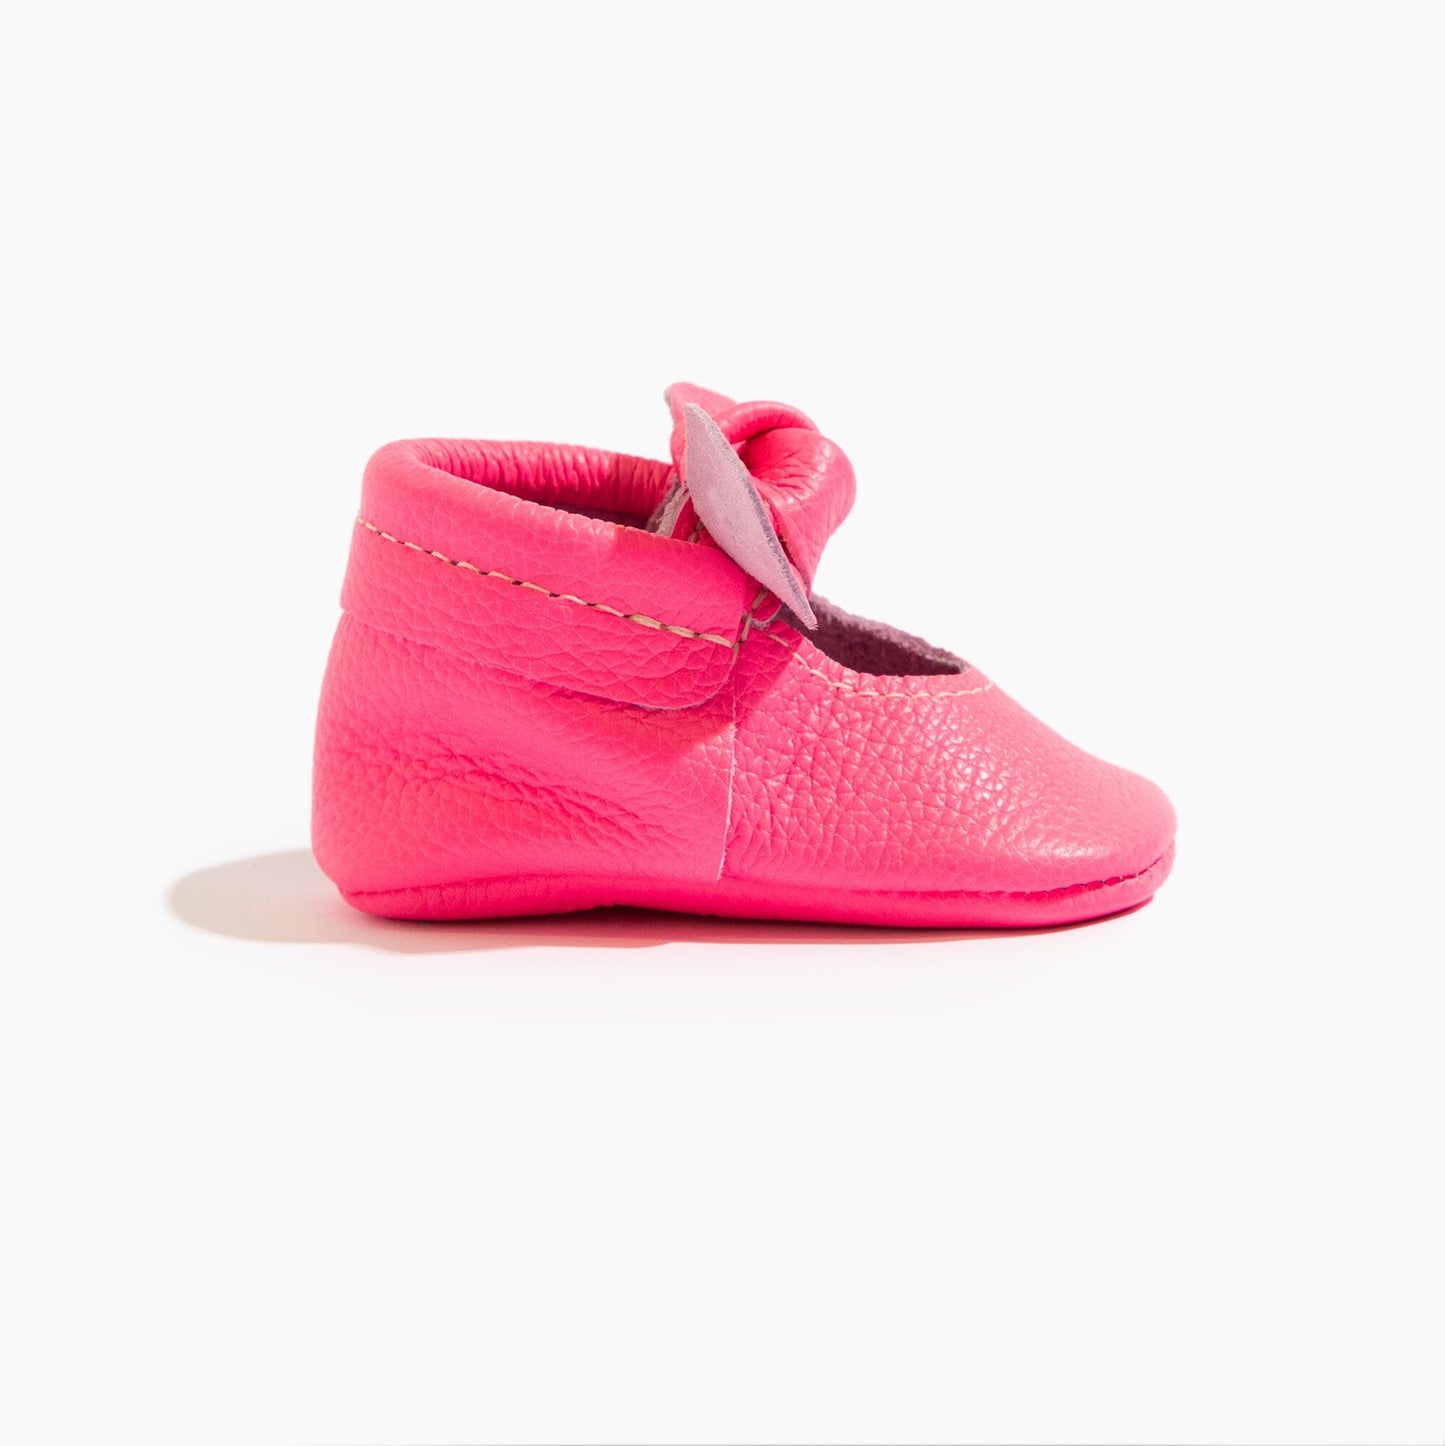 Dreamhouse Pink Knotted Baby Shoe Knotted Bow Mocc Soft Sole 